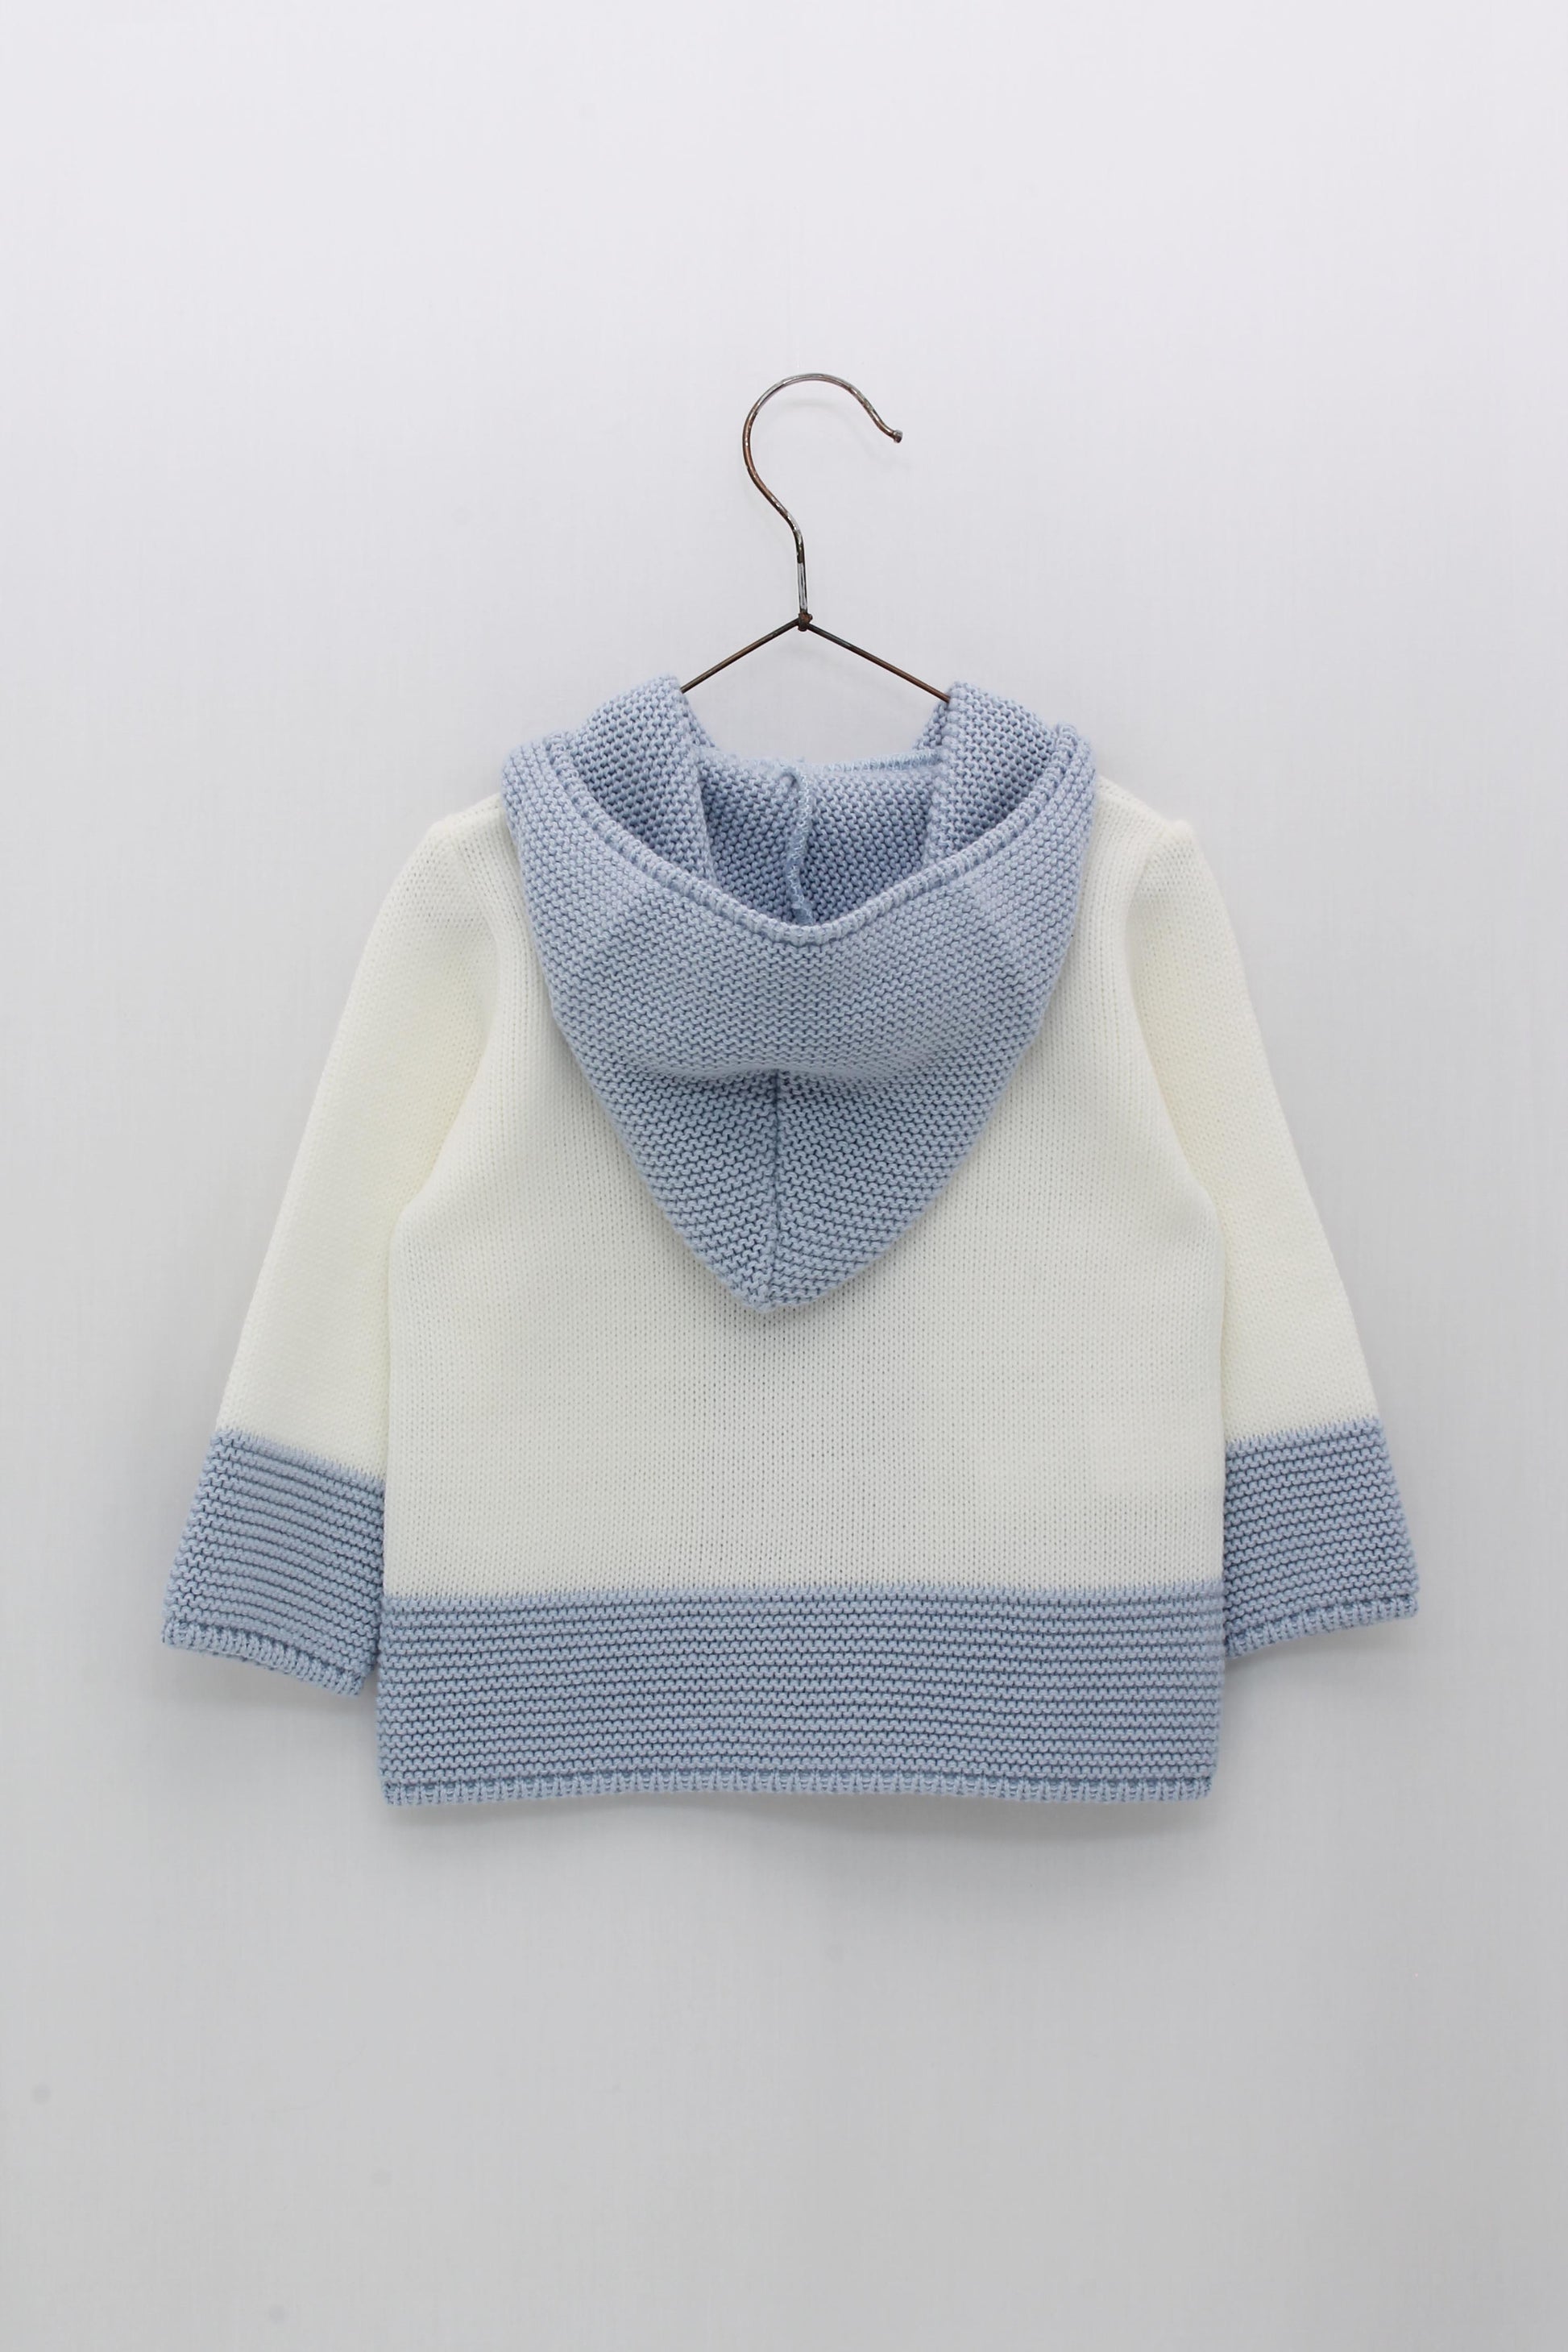 FOQUE Baby Boys Blue & Cream Knitted Coat with Hood 